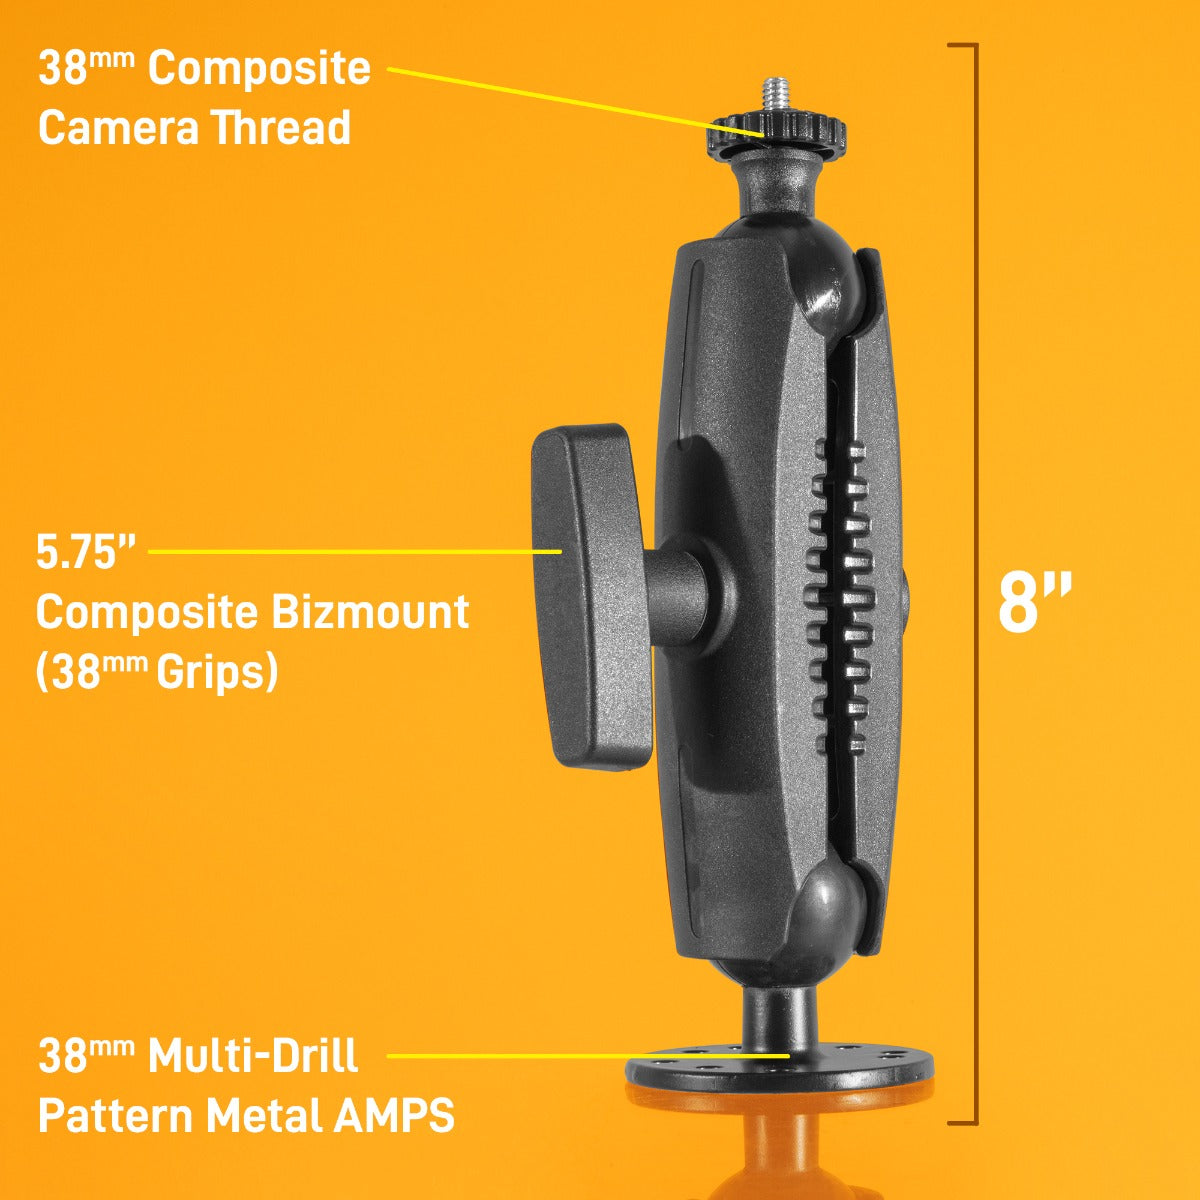 iBOLT™ 38mm / 1.5 inch Metal Circular AMPS to ¼ 20” Composite Camera Screw Mount